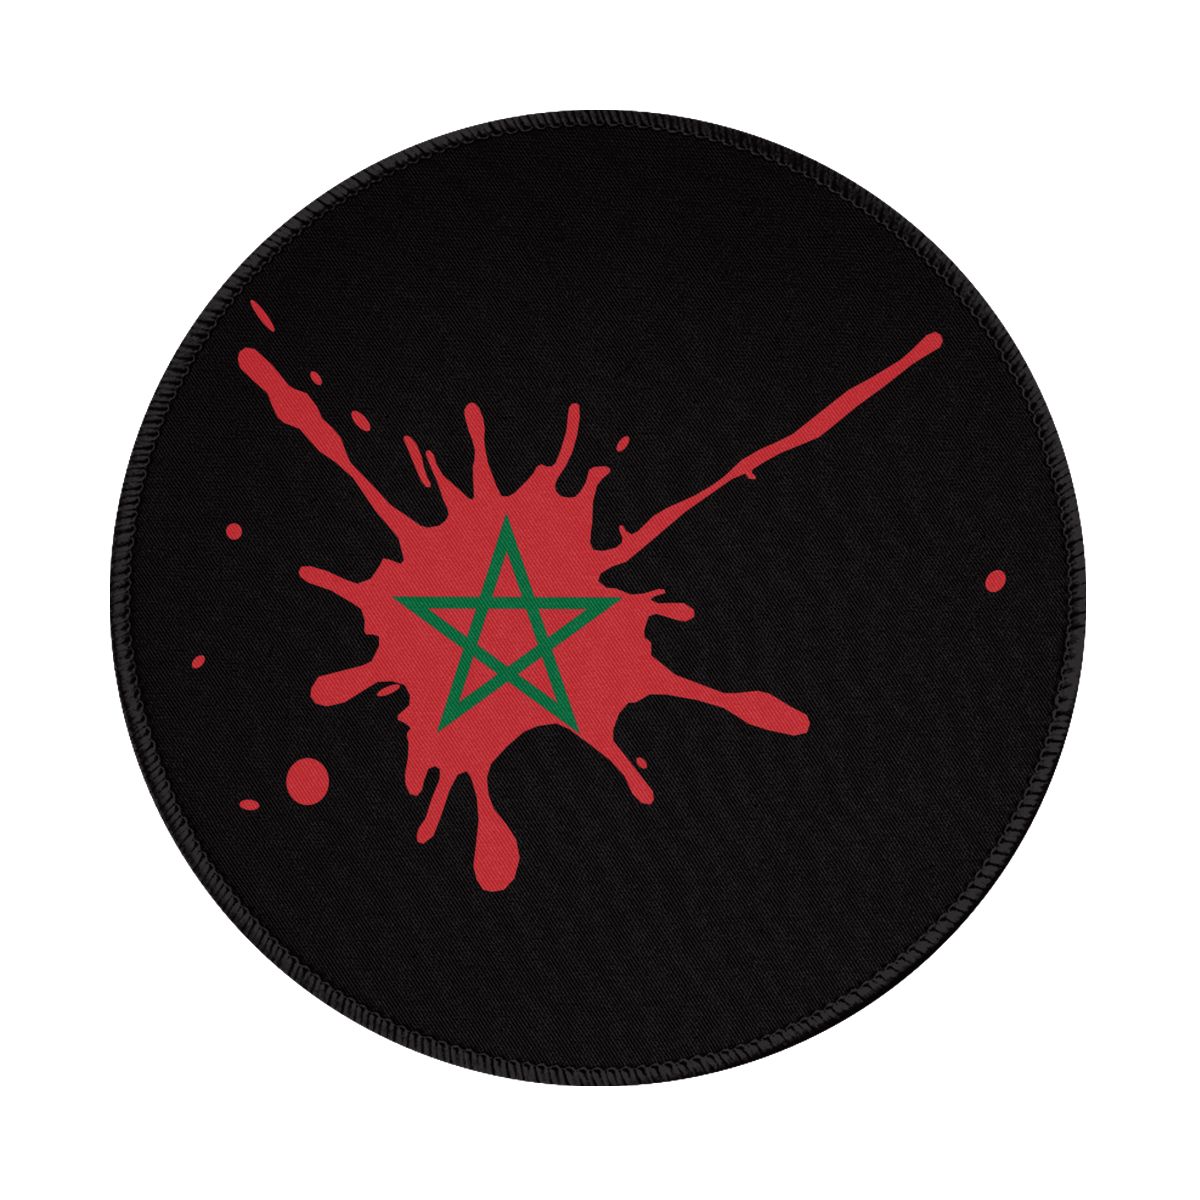 Morocco Ink Spatter Non-Slip Rubber Round Mouse Pad